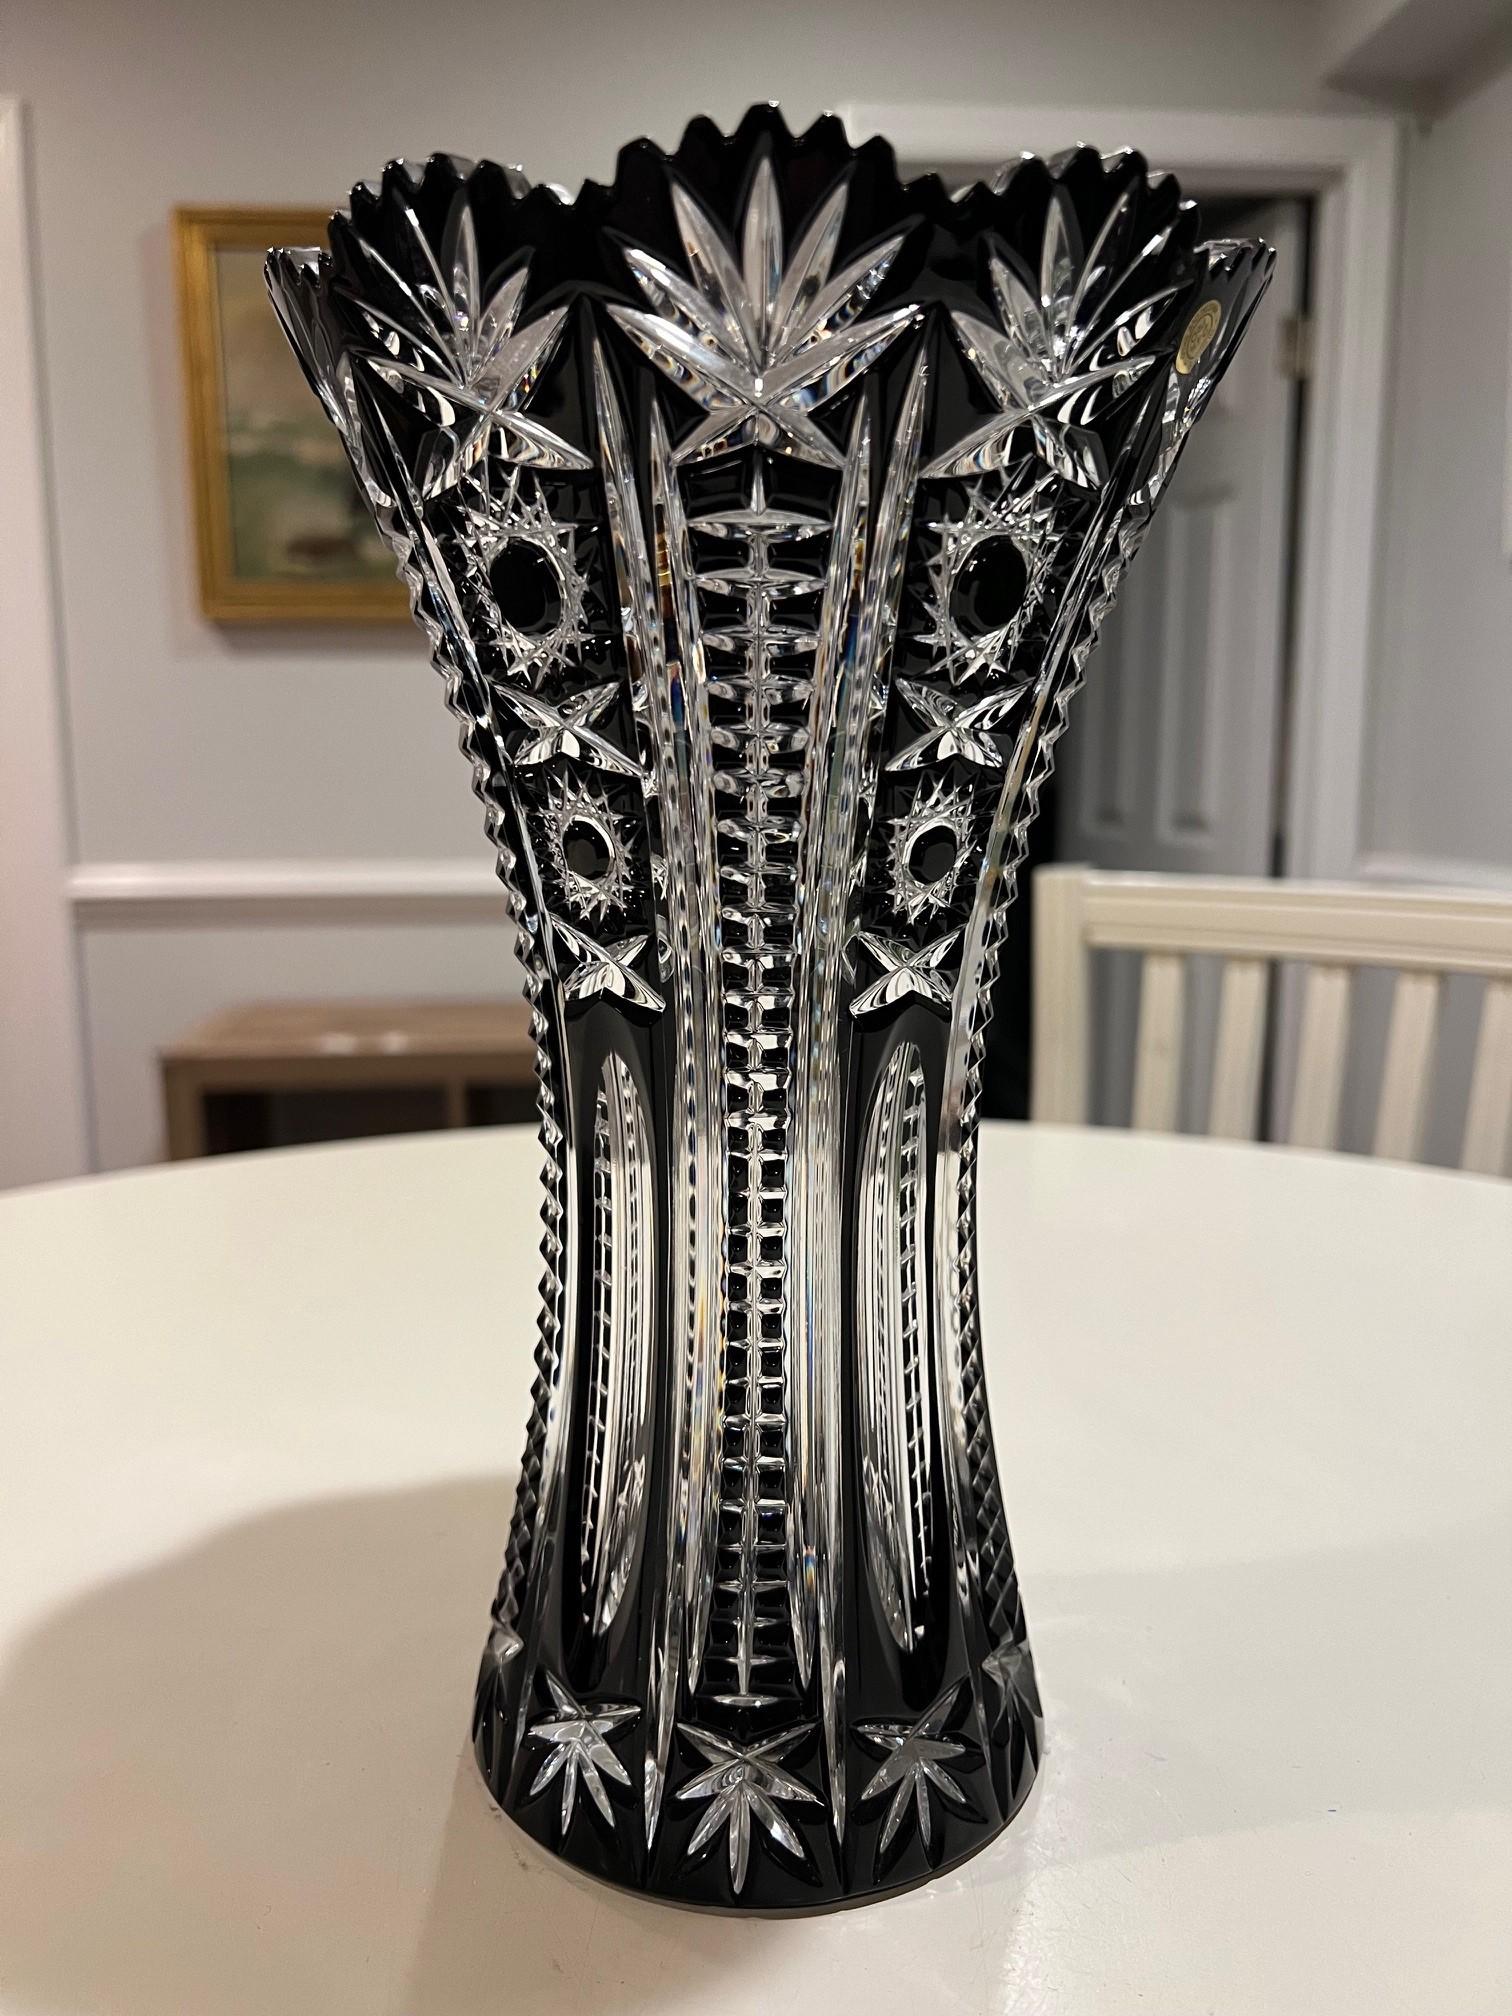 Stunning black hand cut lead crystal vase created as a work of art by the hands of the finest Czech glass workers. The Caesar Crystal Company in the Czech Republic has been selling hand cut lead crystal pieces since 1861 and is known as one of the